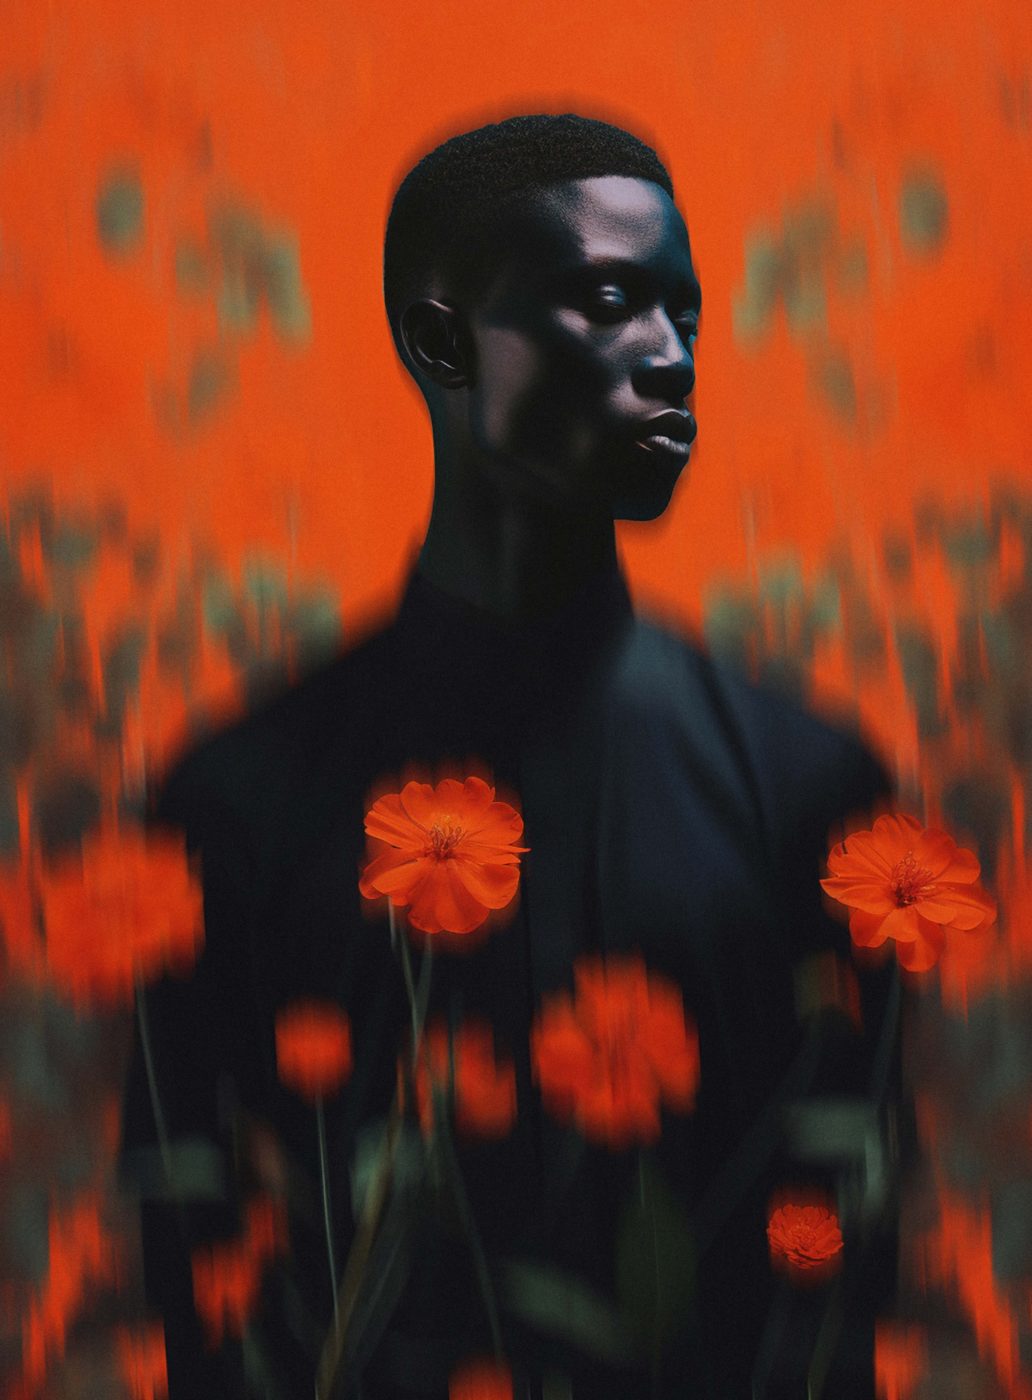 A man stands surrounded by orange flowers.